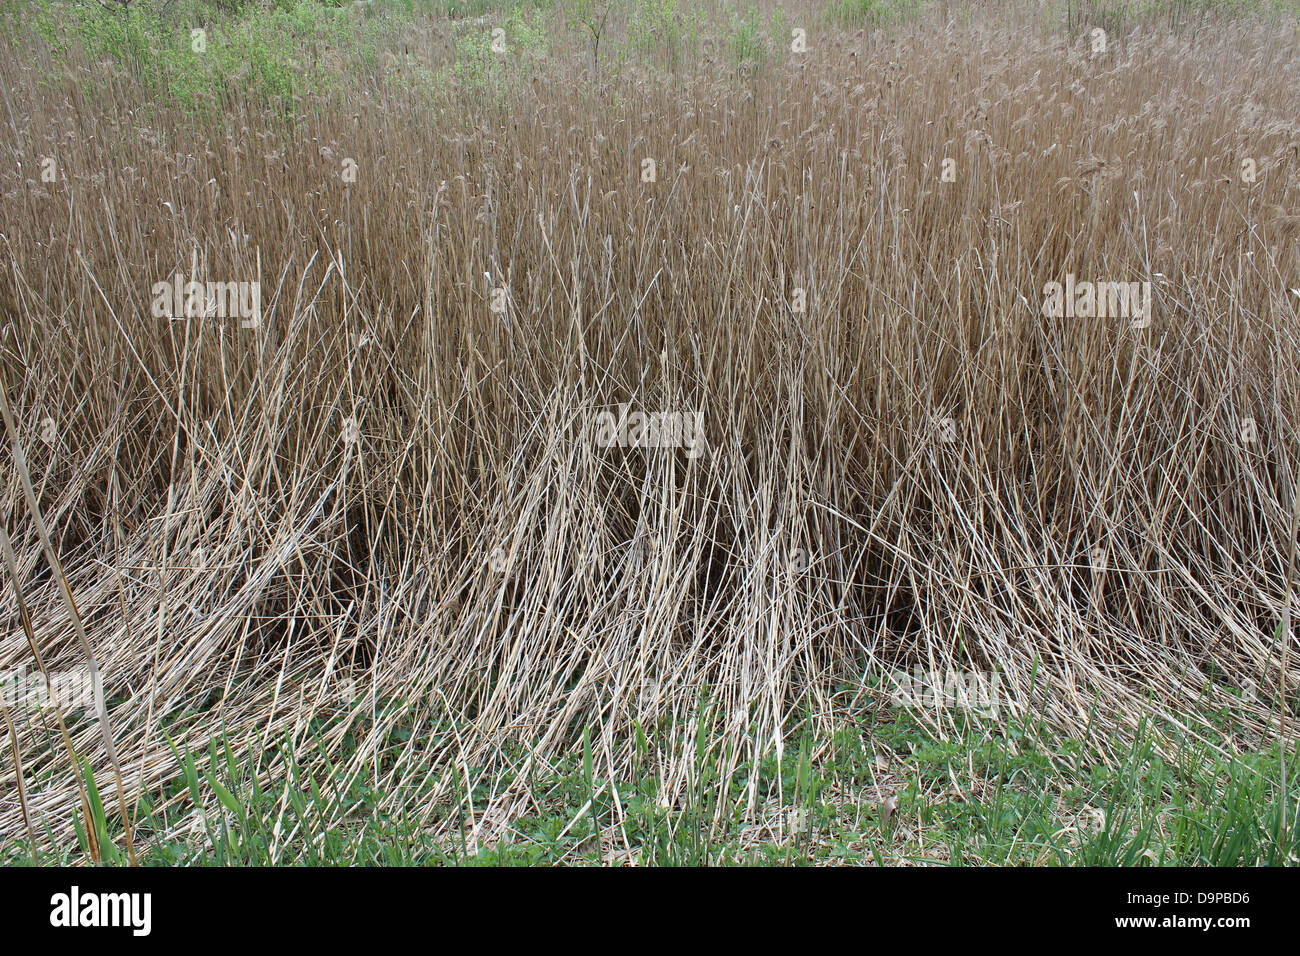 image of thicket of phragmites near the mire Stock Photo